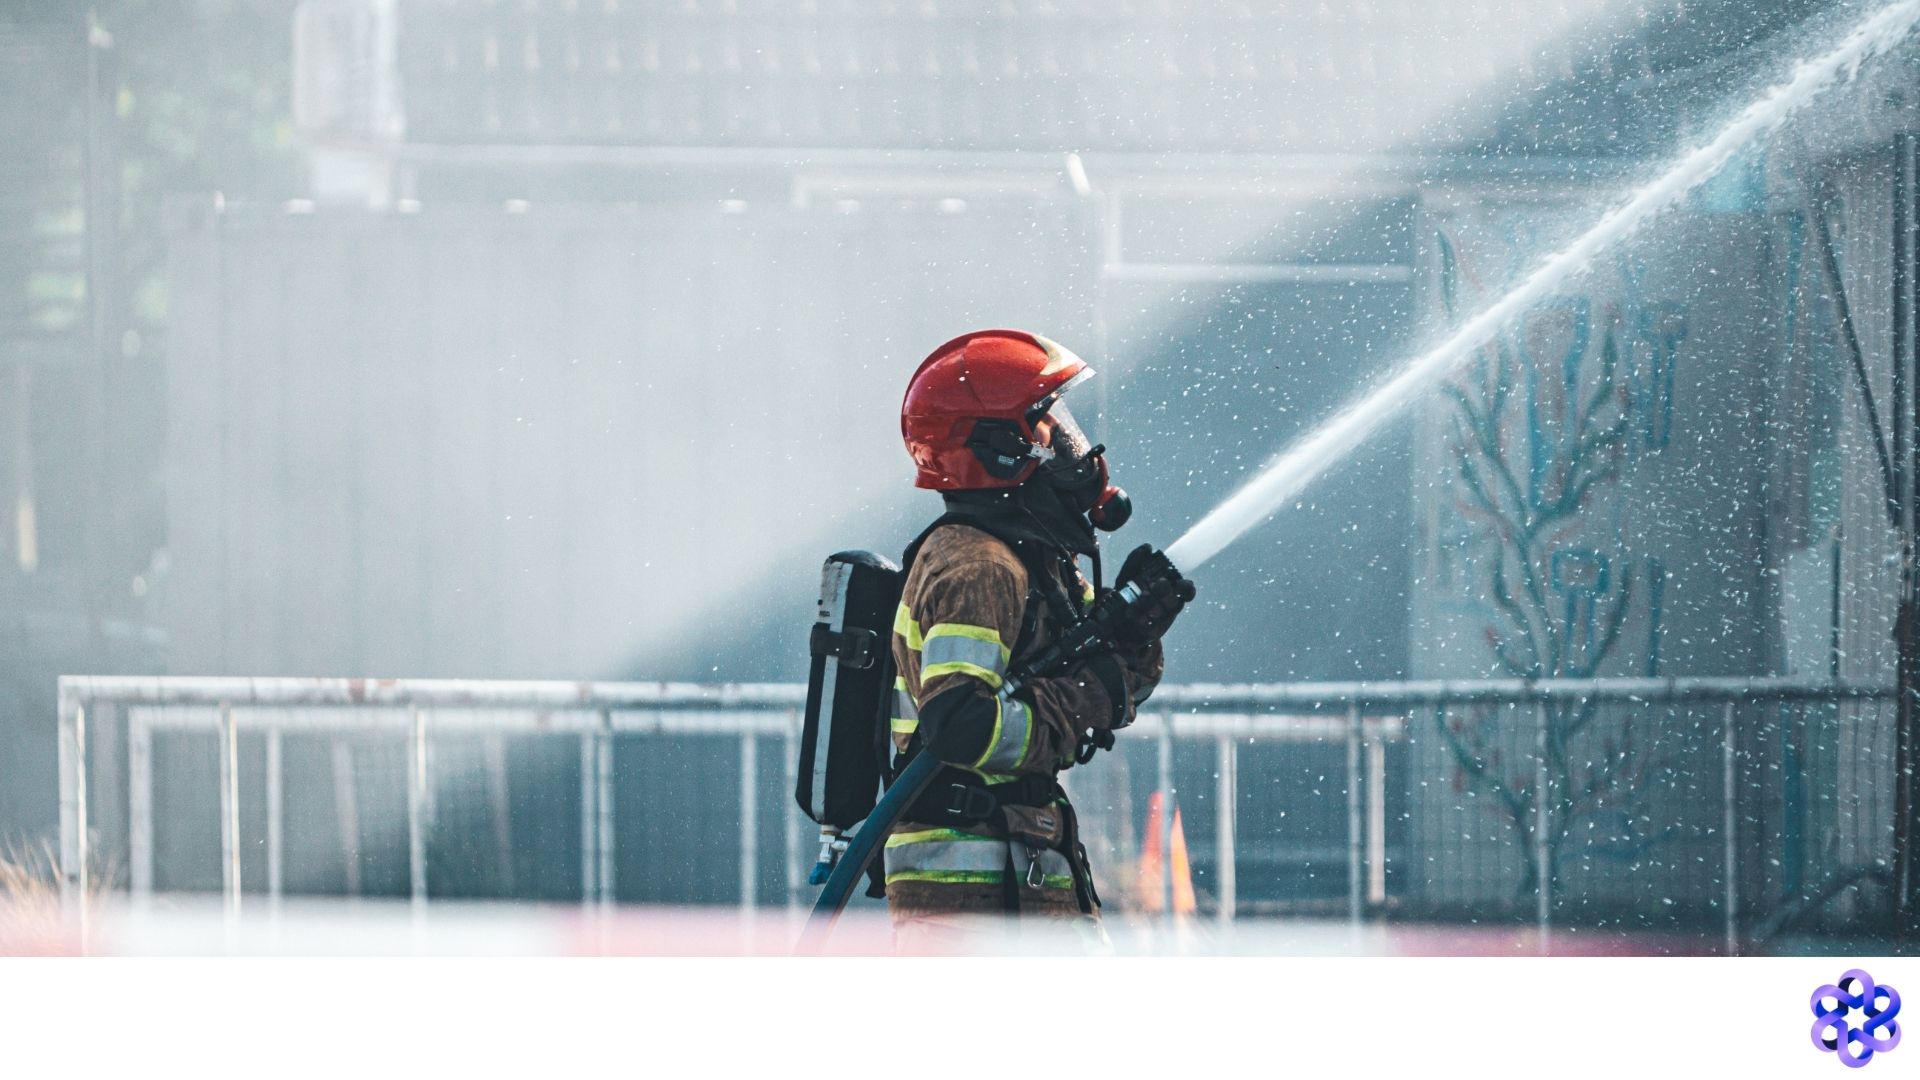 Firefighter Interview Questions